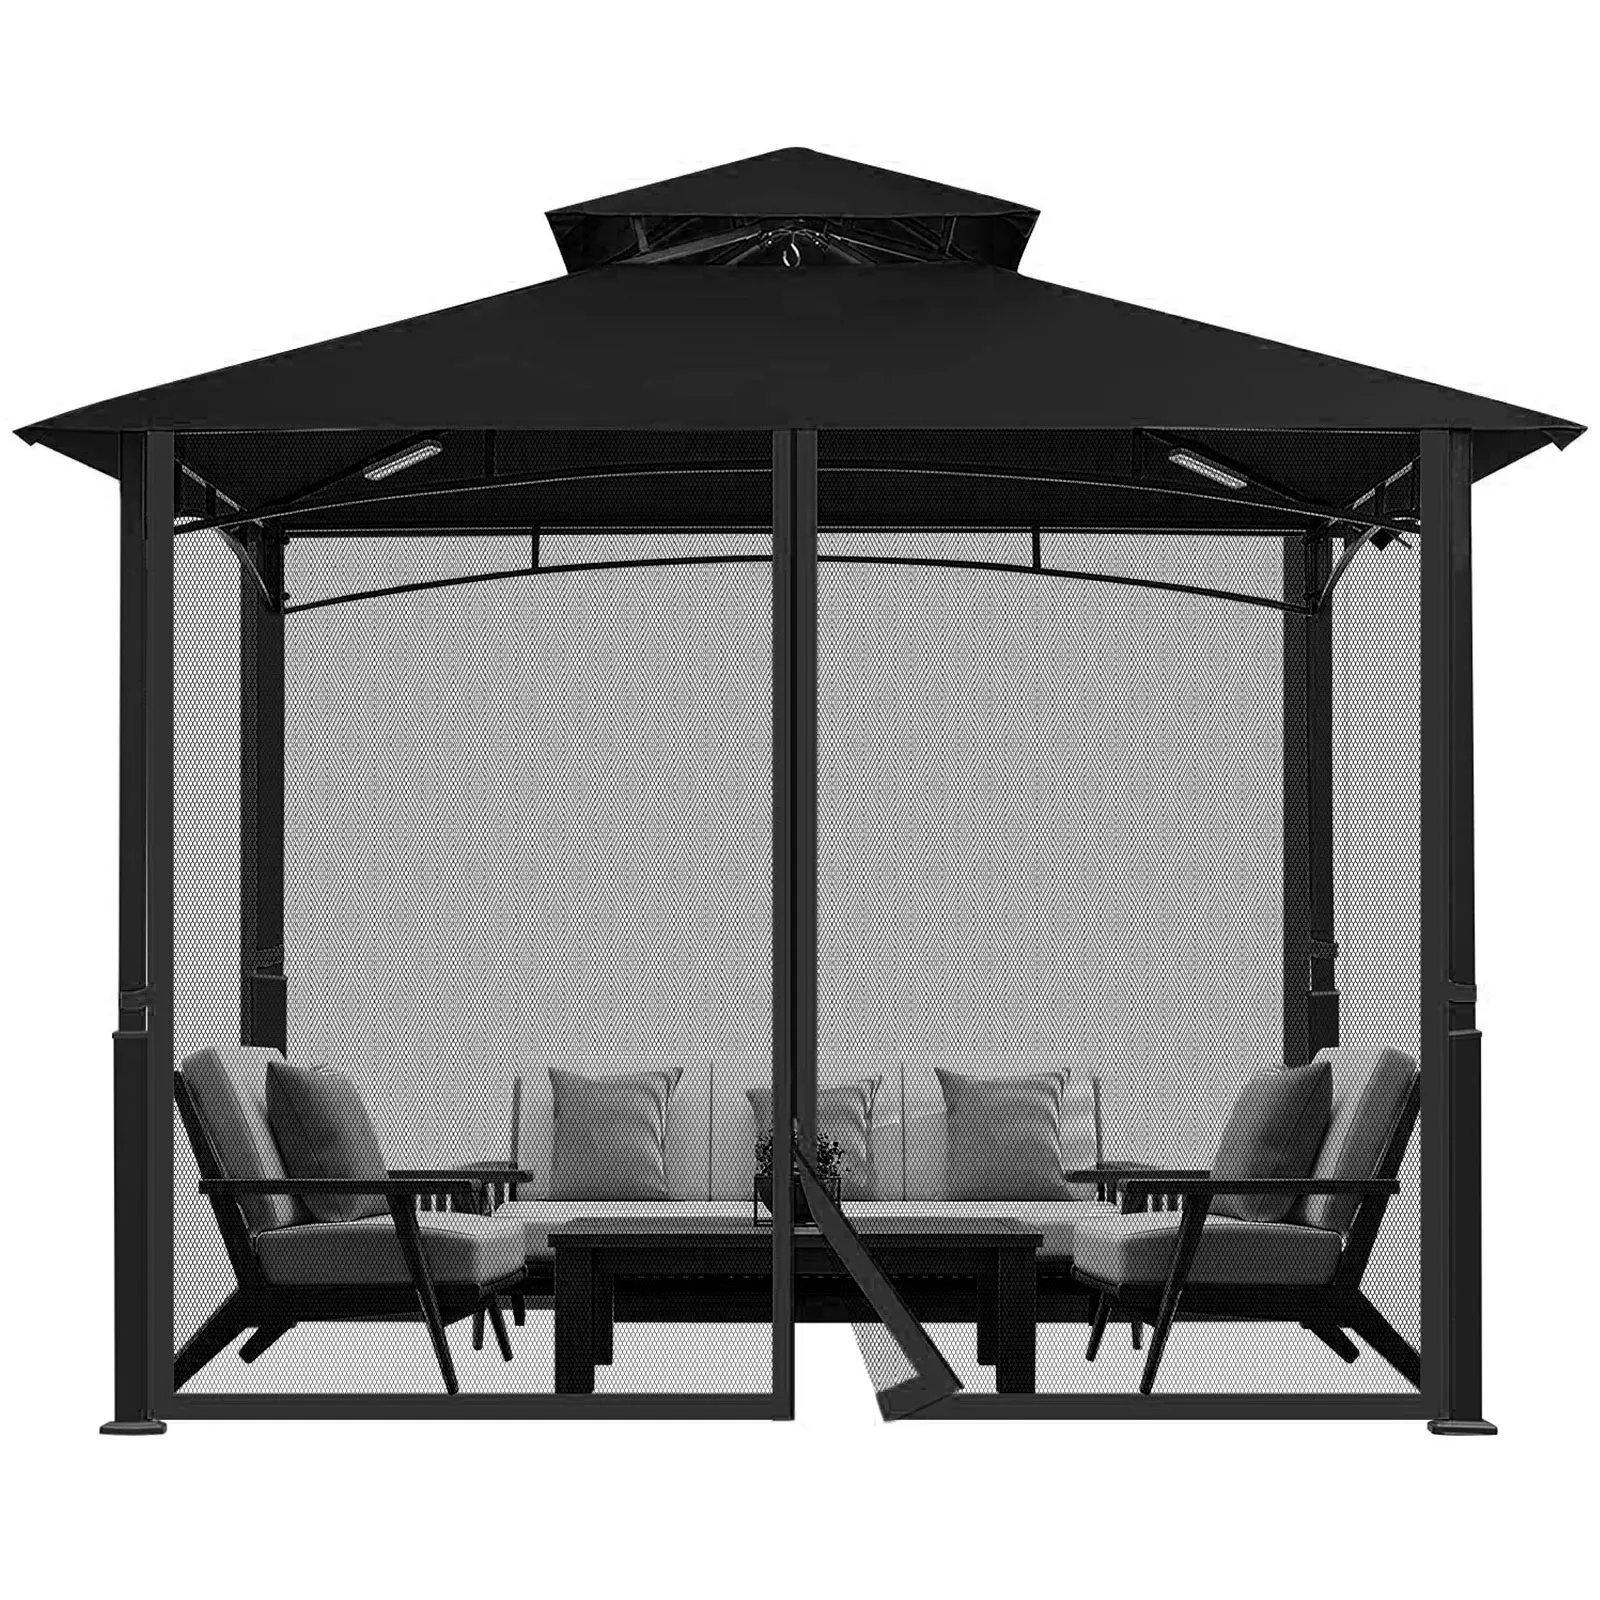 

4-panel Sidewall Gazebo Replacement Zippers Canopy Mosquito Curtain Patio With For Netting Outdoor Net Universal Screen Garden